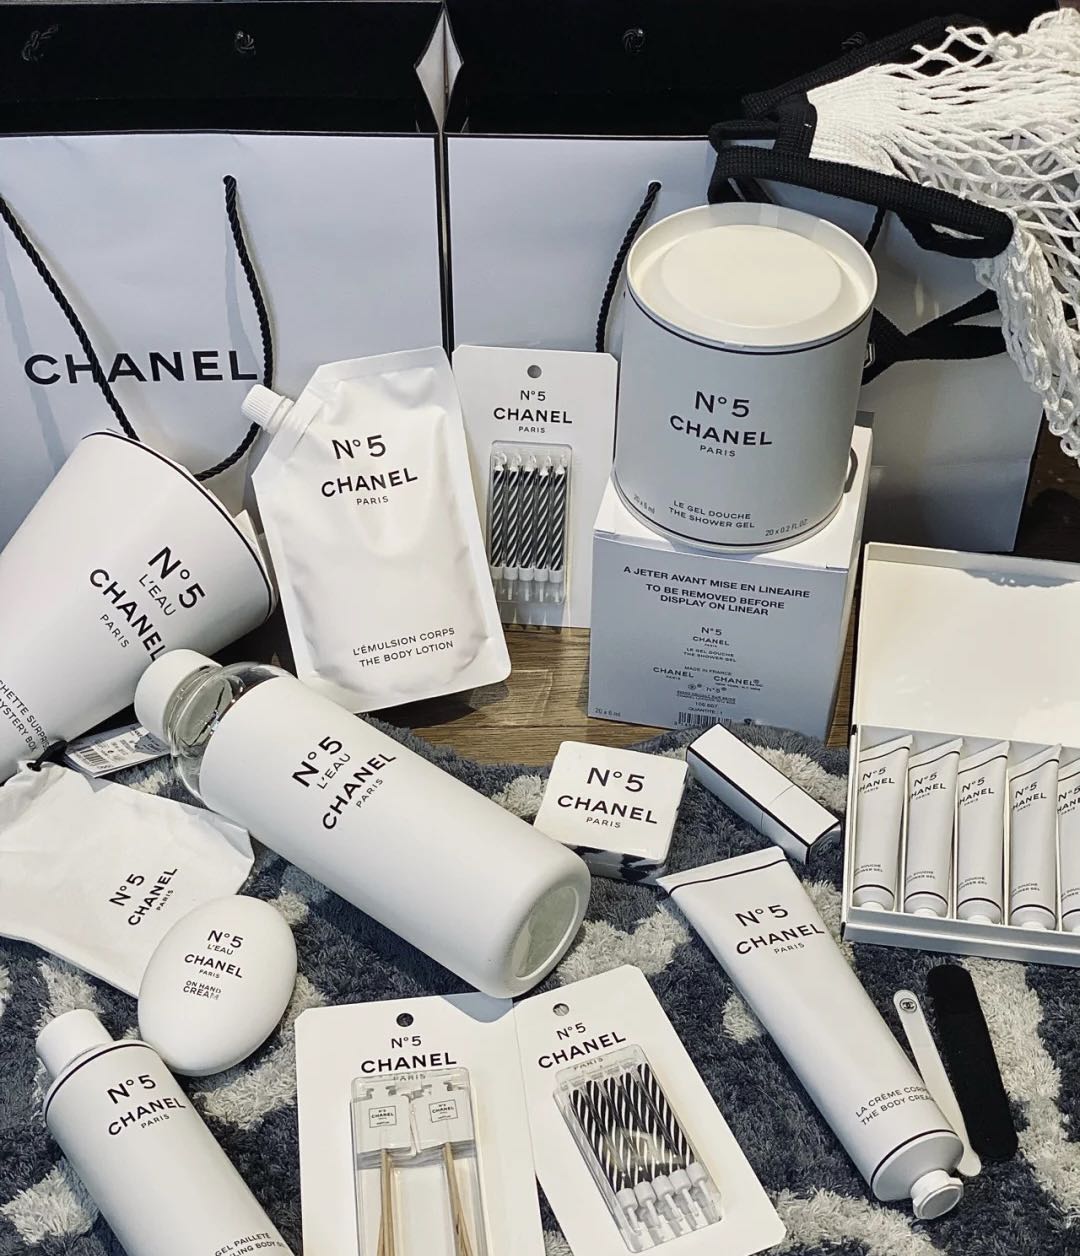 Chanel Factory 5 Collection